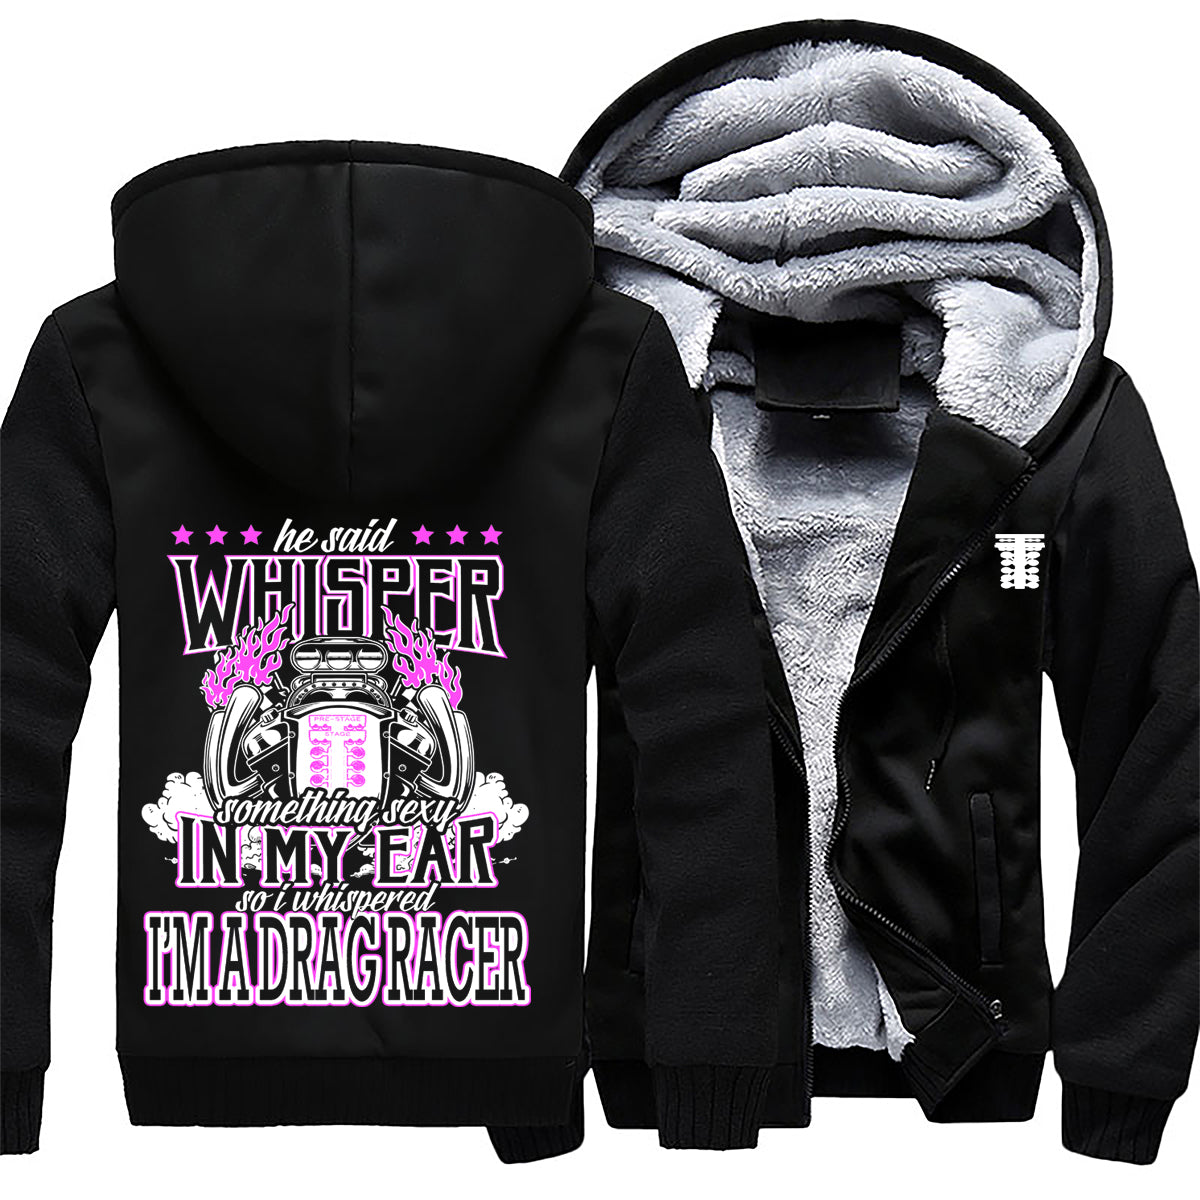 He Said Whisper Something Sexy In My Ear Drag Racer Jacket